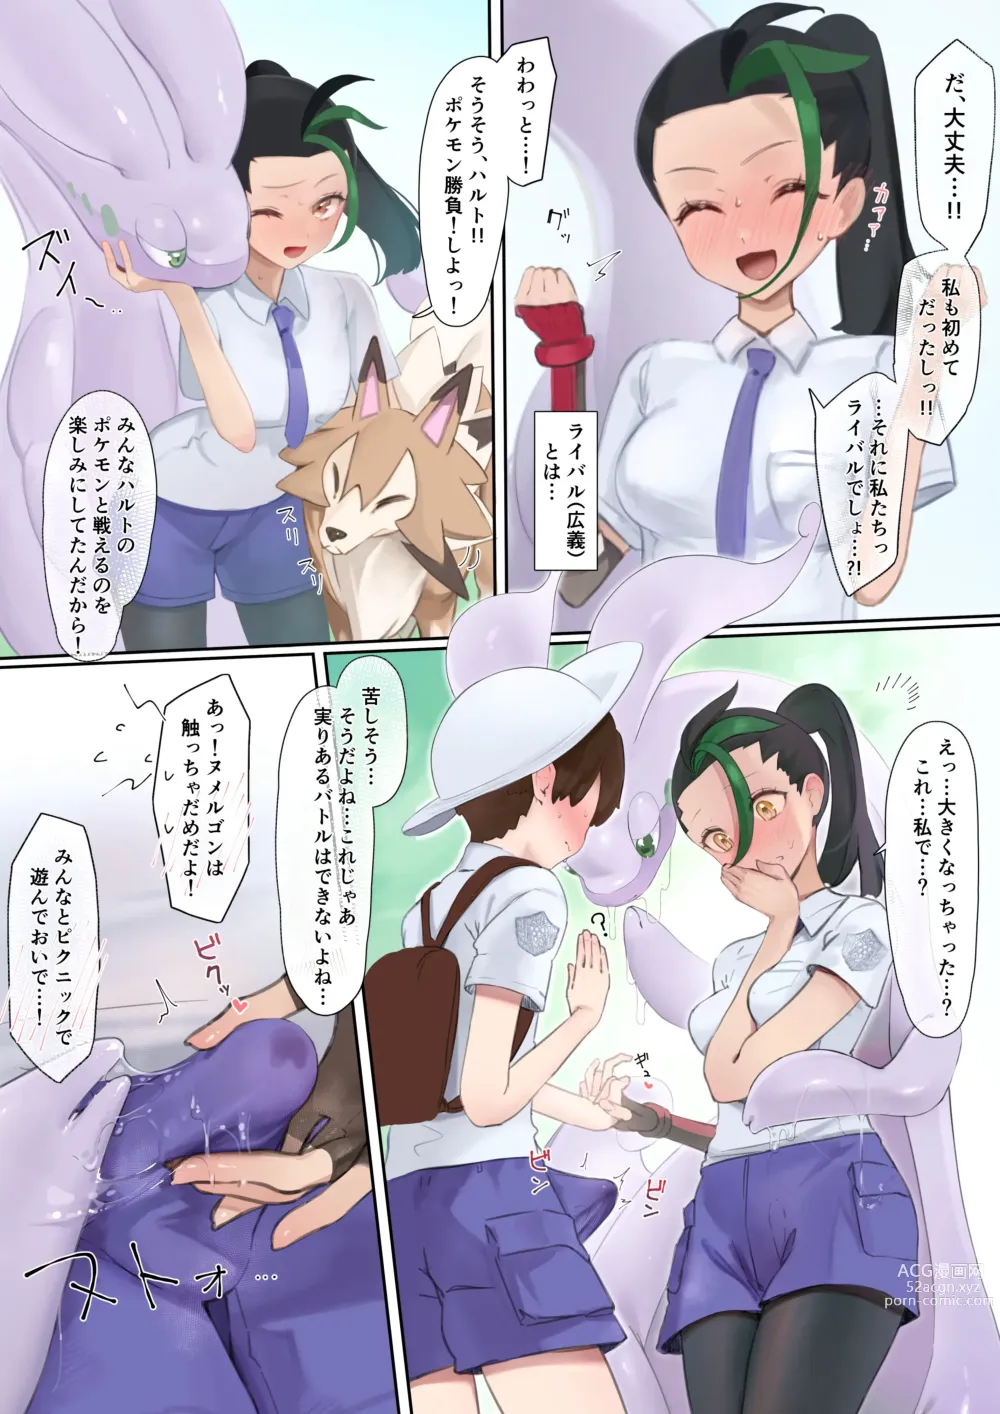 Page 2 of imageset 猫の幼虫